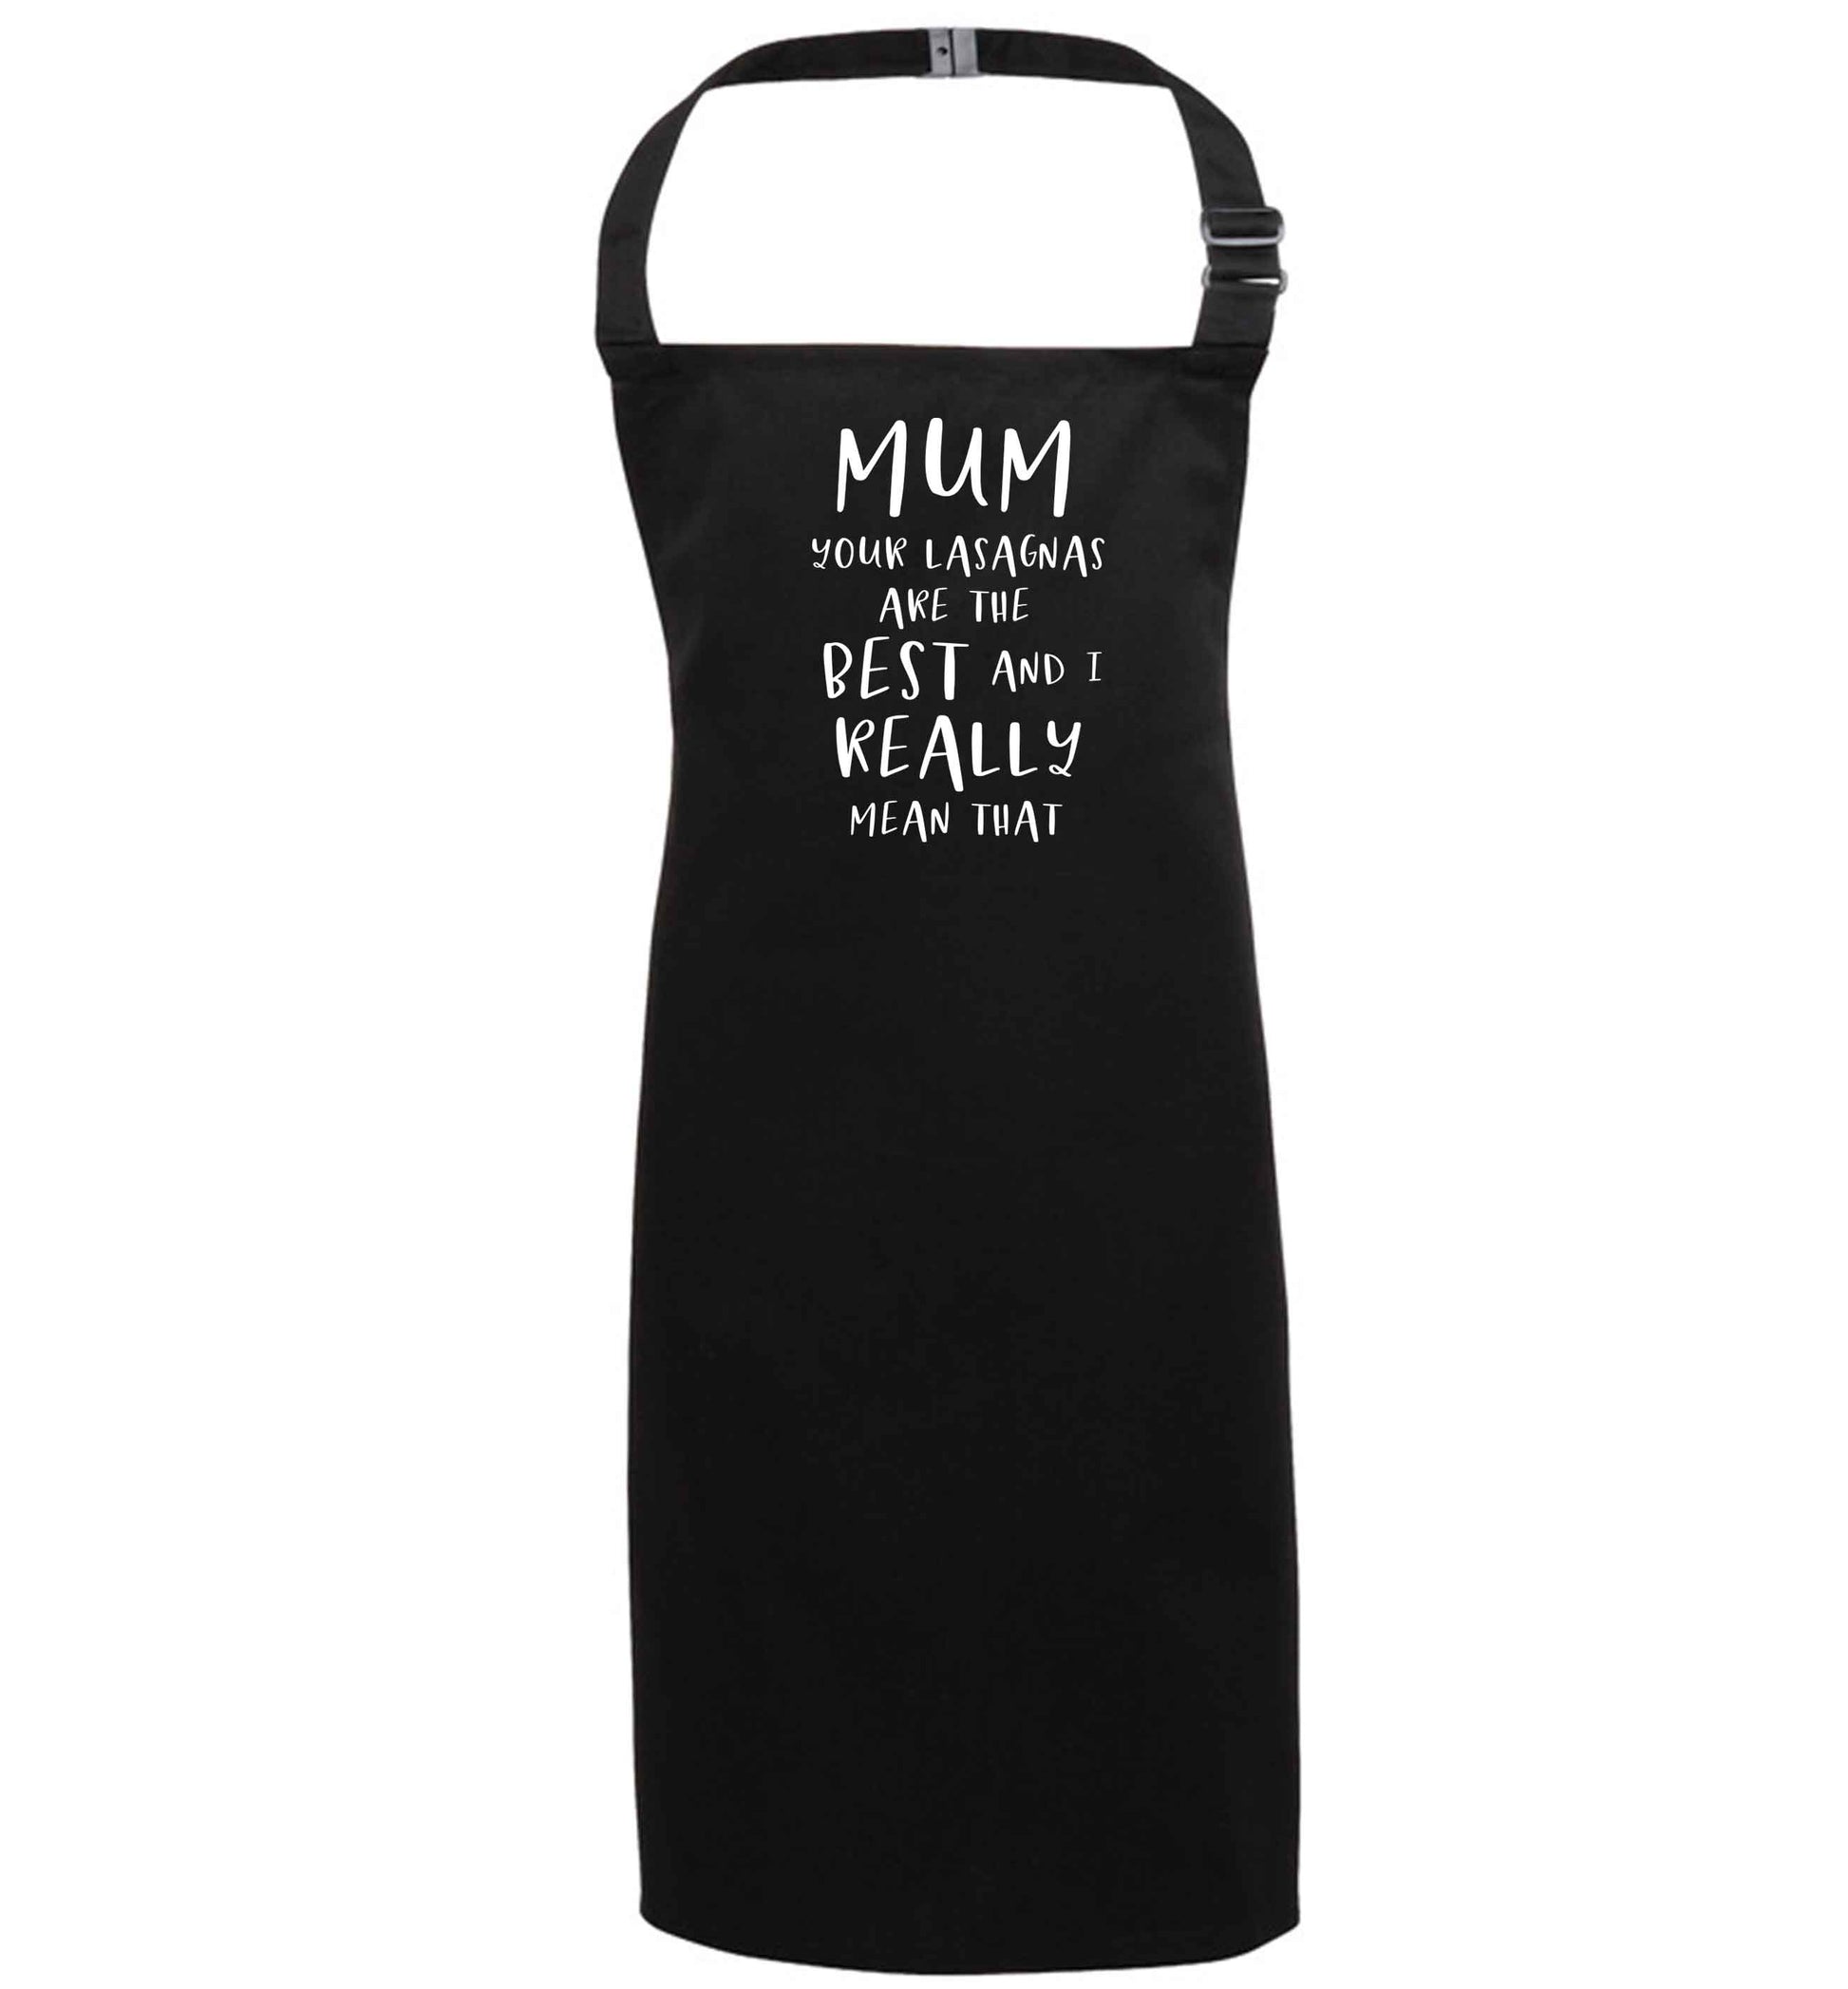 Funny gifts for your mum on mother's dayor her birthday! Mum your lasagnas are the best and I really mean that black apron 7-10 years